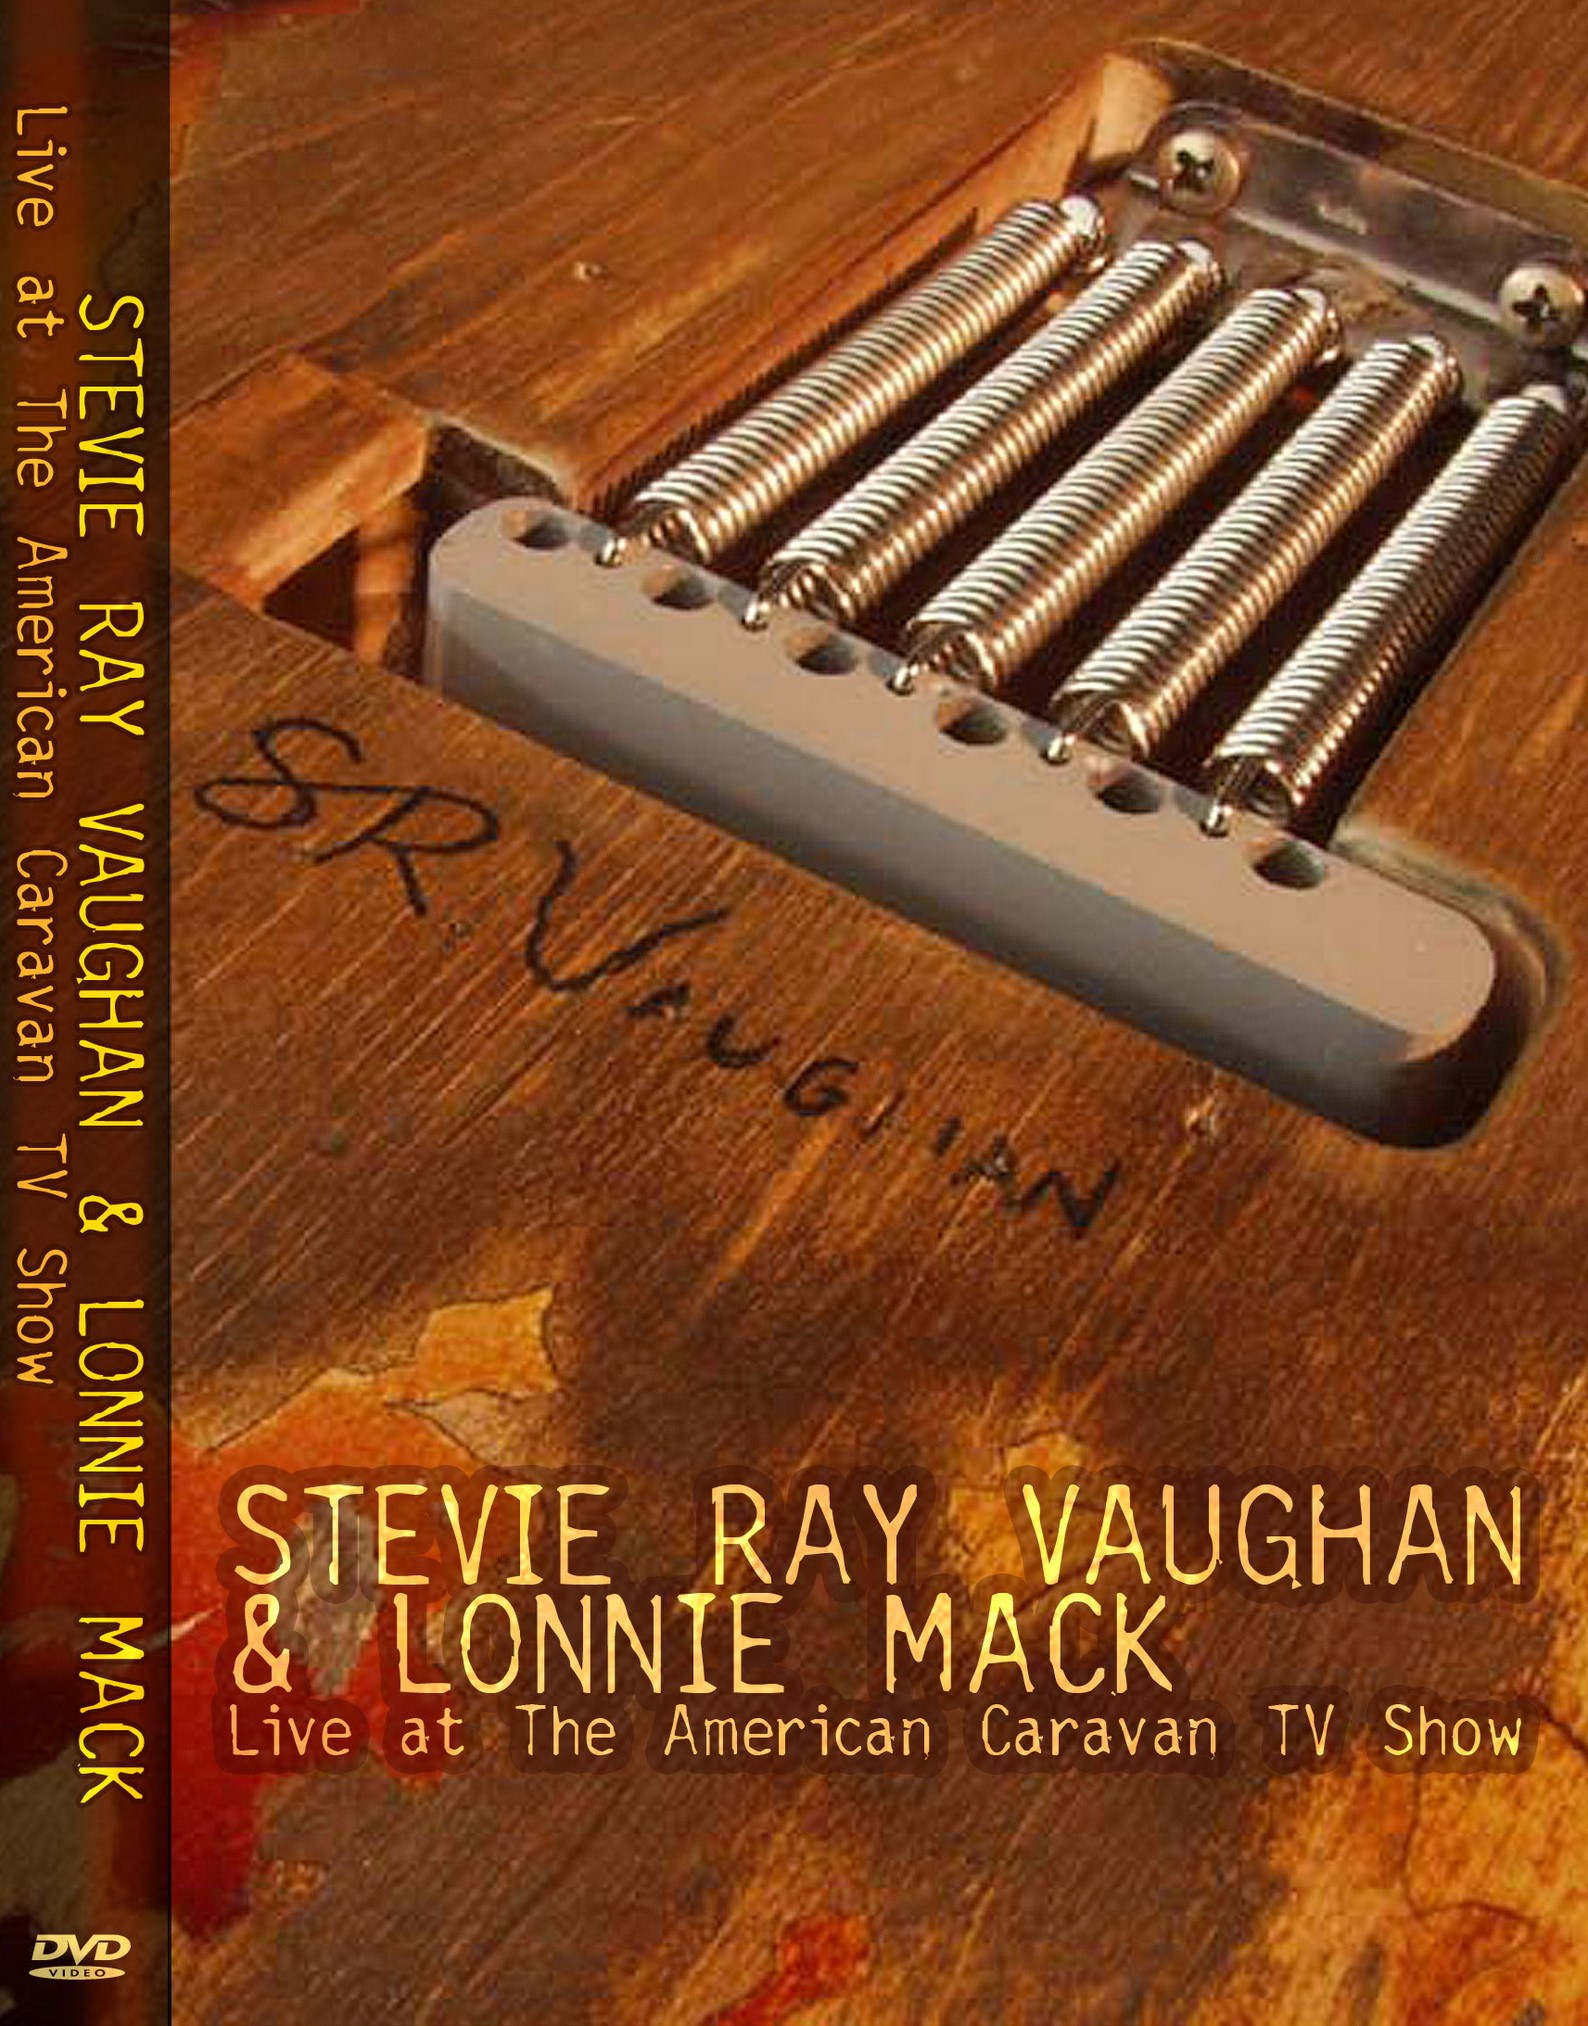 Stevie Ray Vaughan and Lonnie Mack - Live at The American Caravan TV Show (1986) (2xDVD)